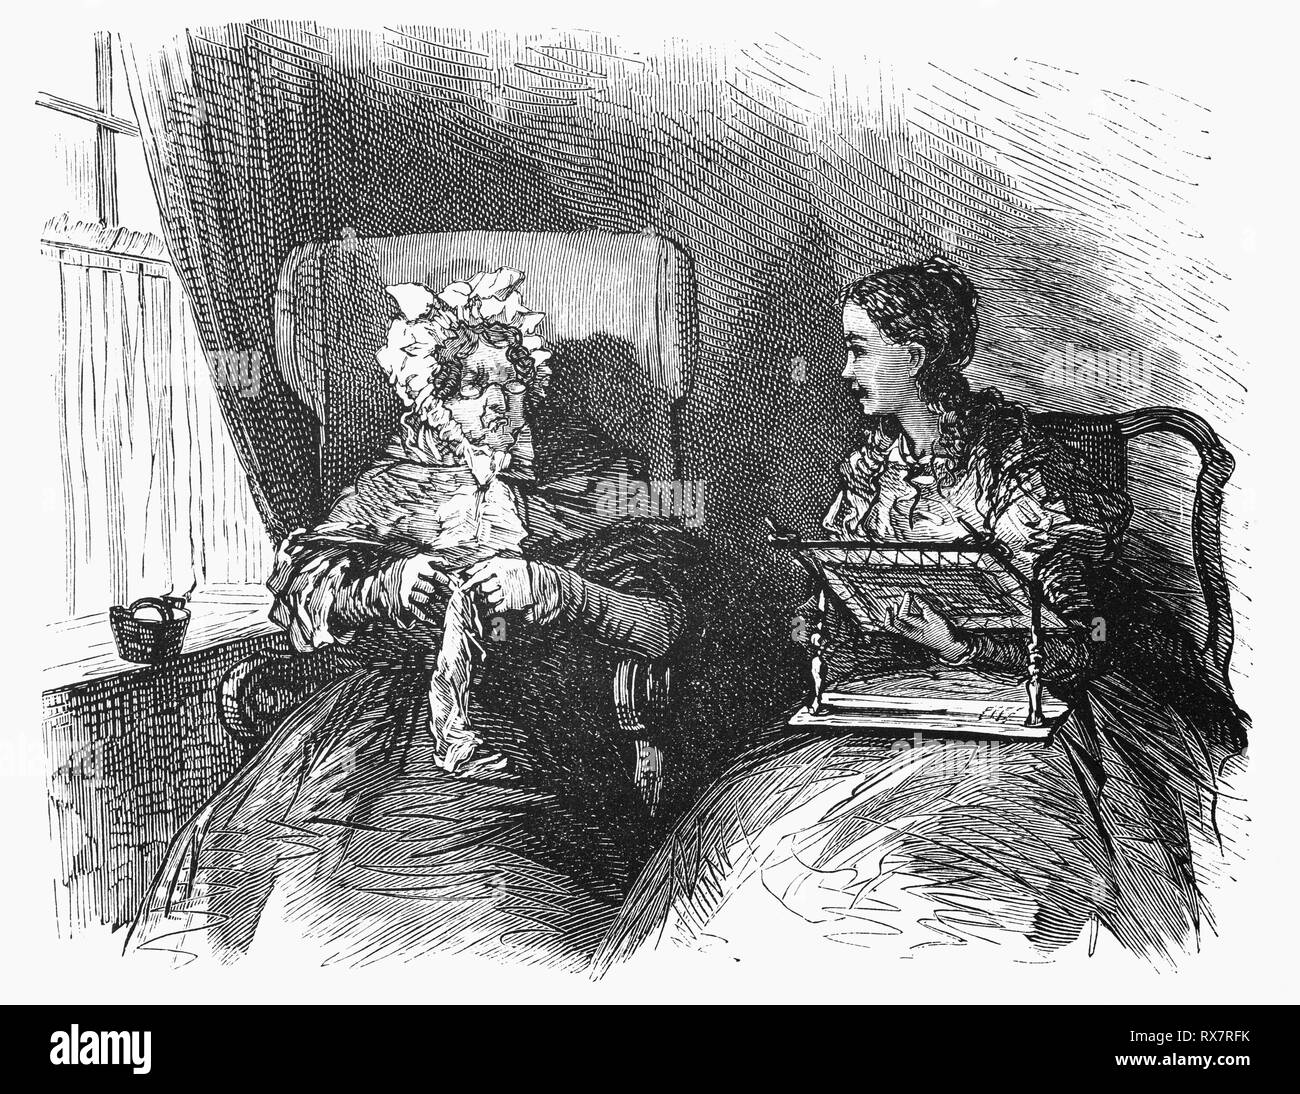 Young Dutch girl and her grumpy aunt.  From the 19th Century Camera Obscura, a collection of Dutch humorous-realistic essays, stories and sketches in which Hildebrand, the author, takes an ironic look at the behavior of the 'well-to-do', finding  them bourgeois and without a good word for them. Stock Photo